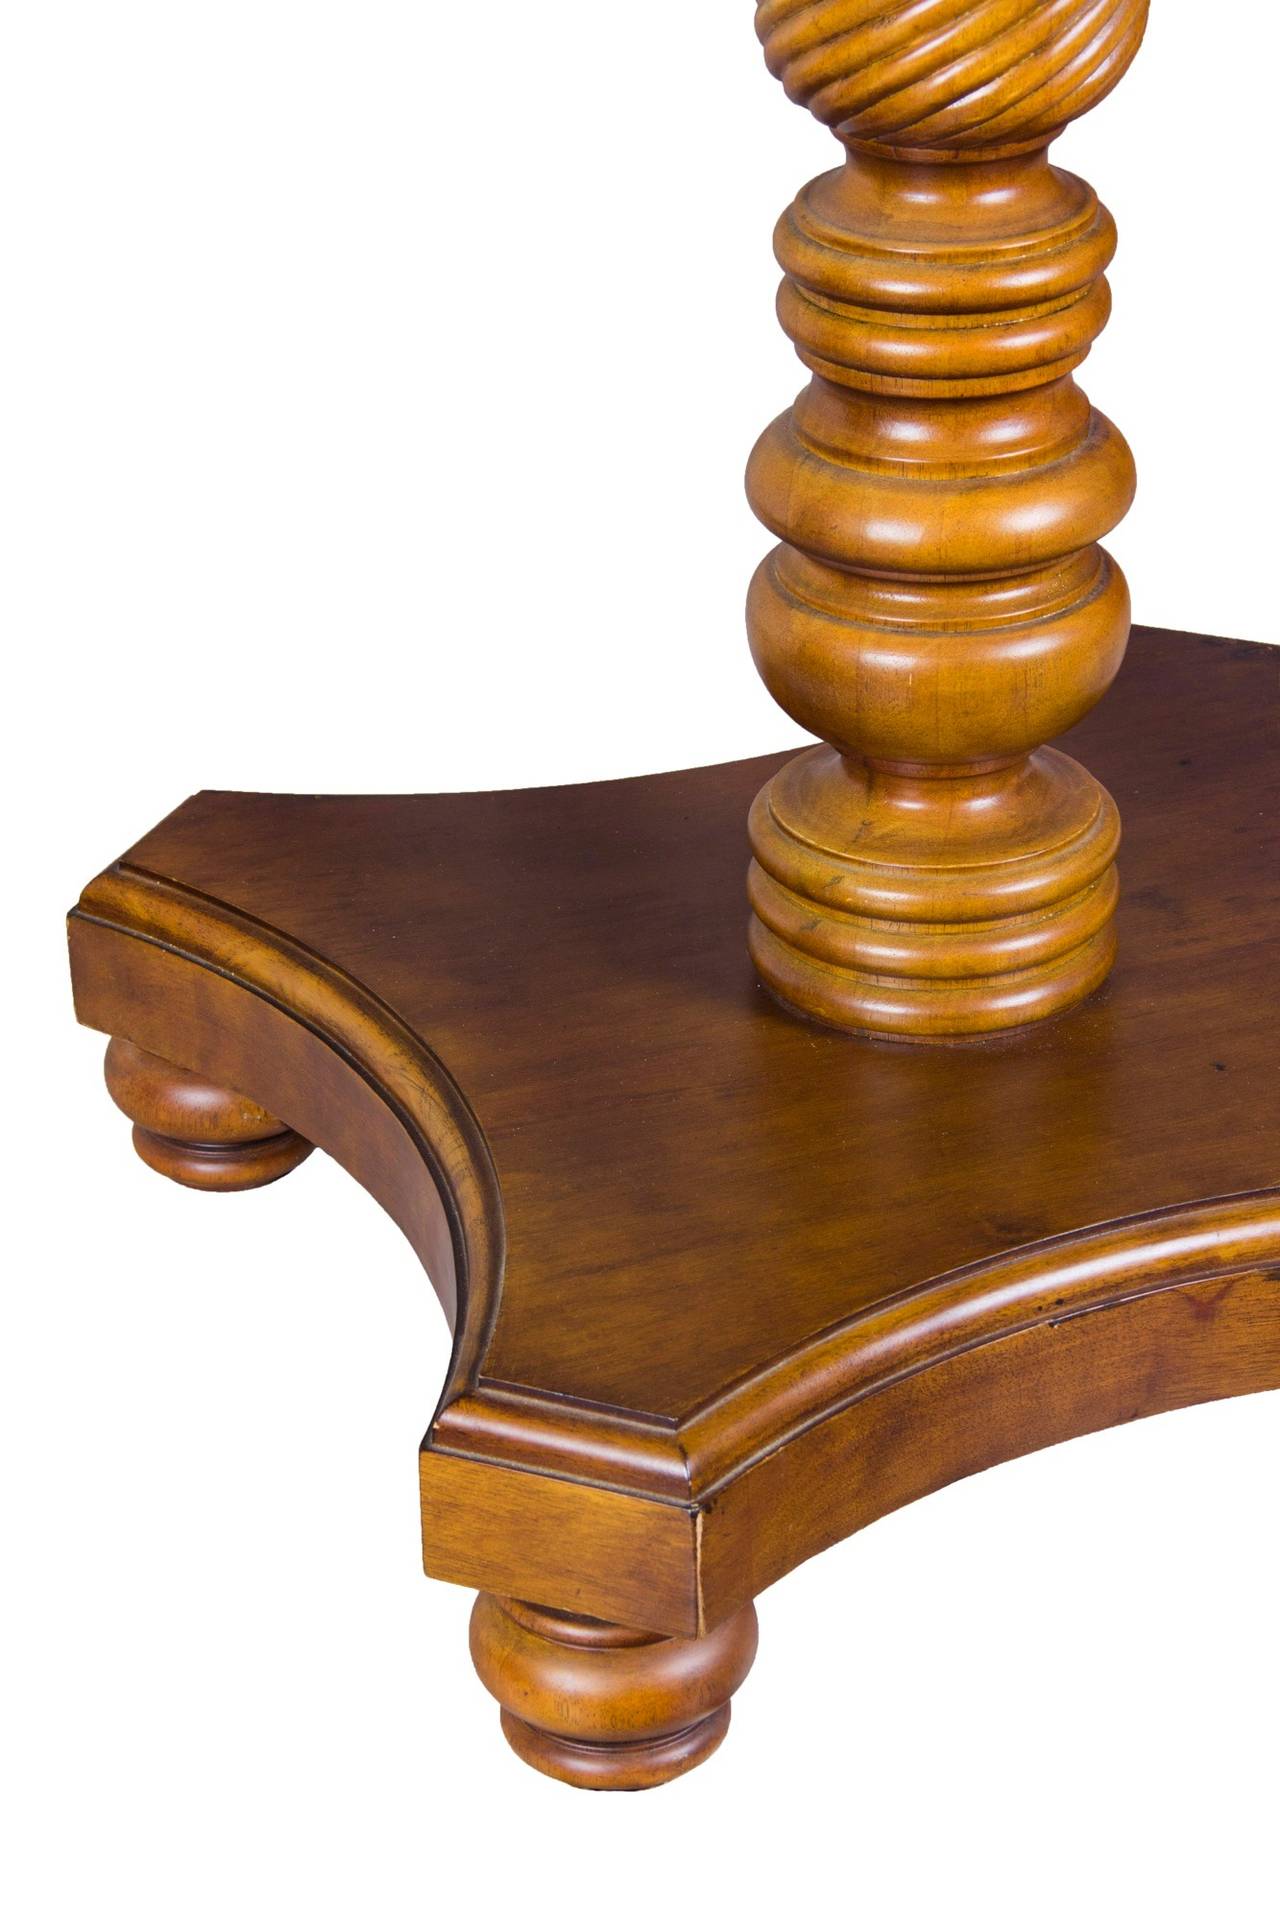 20th Century Large Mahogany Painting Stand or Easel with a Revolving Four-Picture Capability